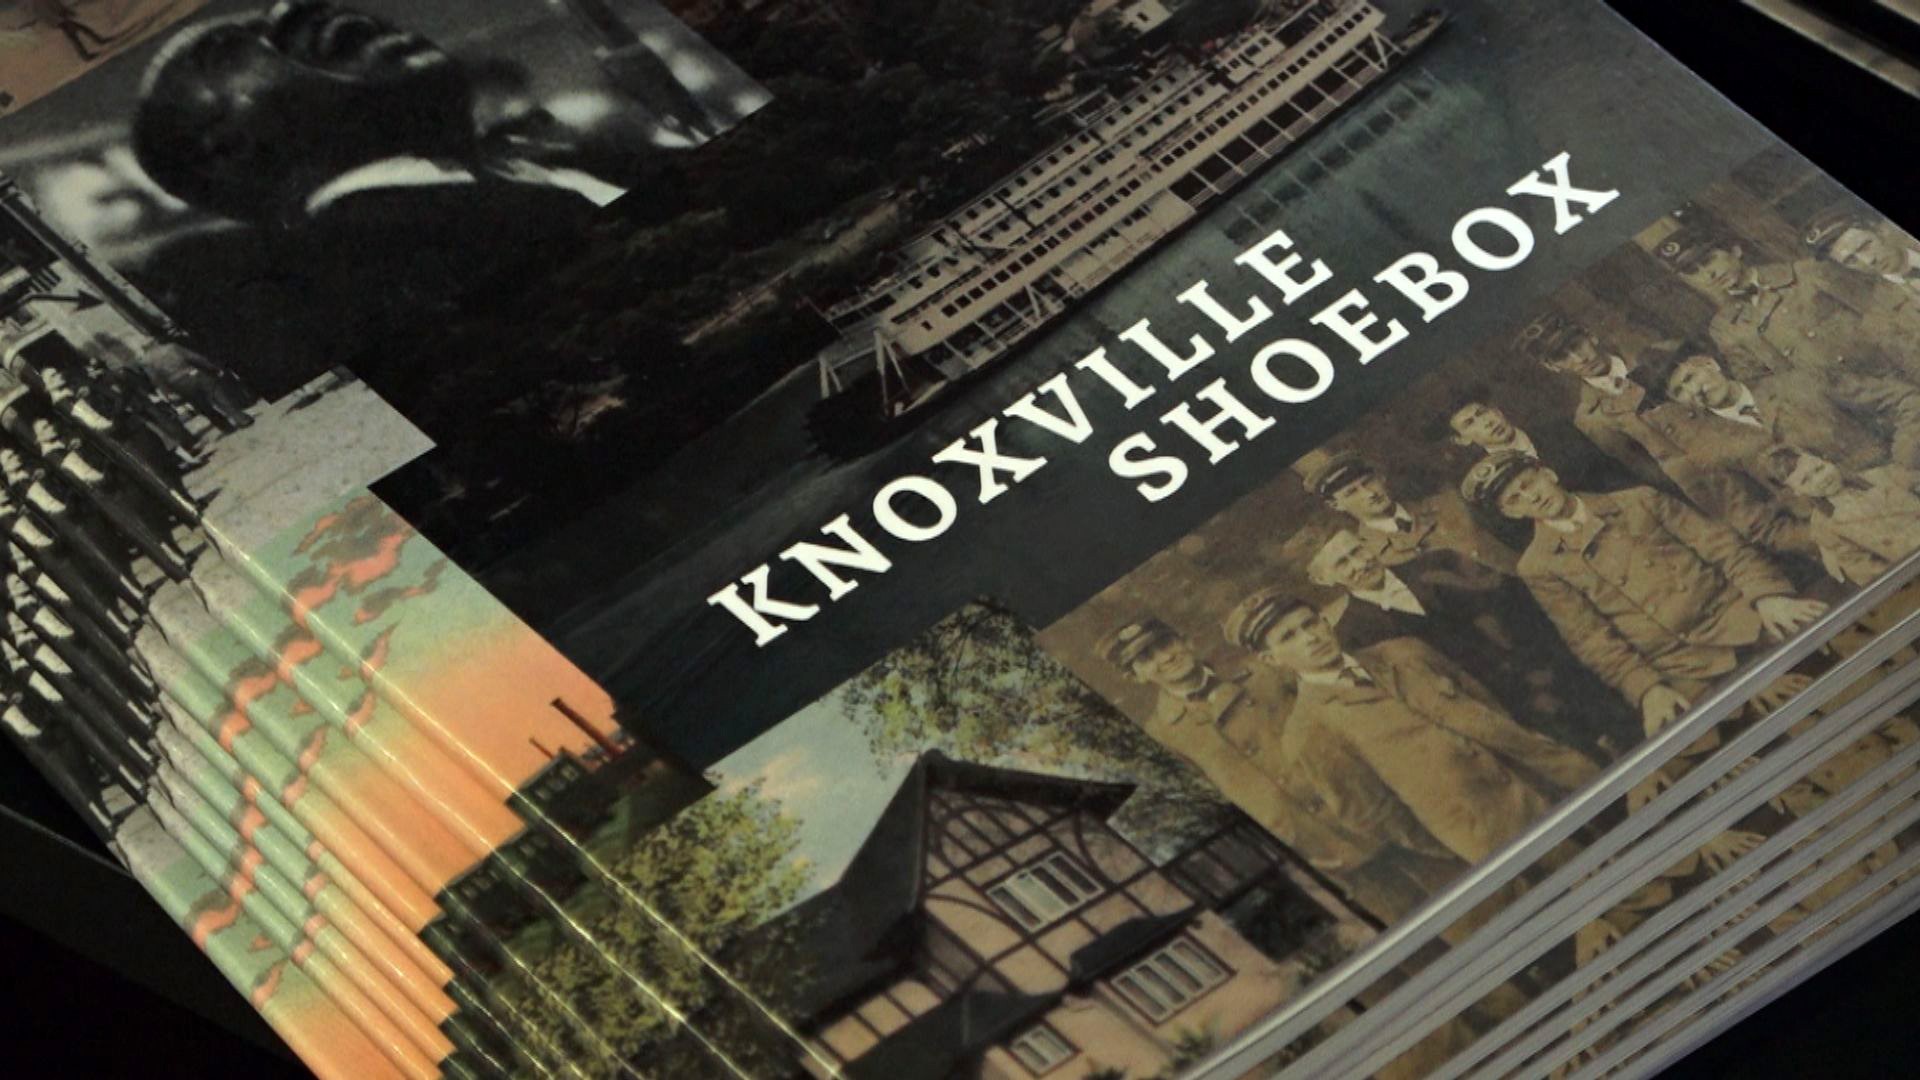 The non-profit Knoxville History Project wants to scan your old photographs and mementos stashed at home to paint a more complete picture of the entire city's past.